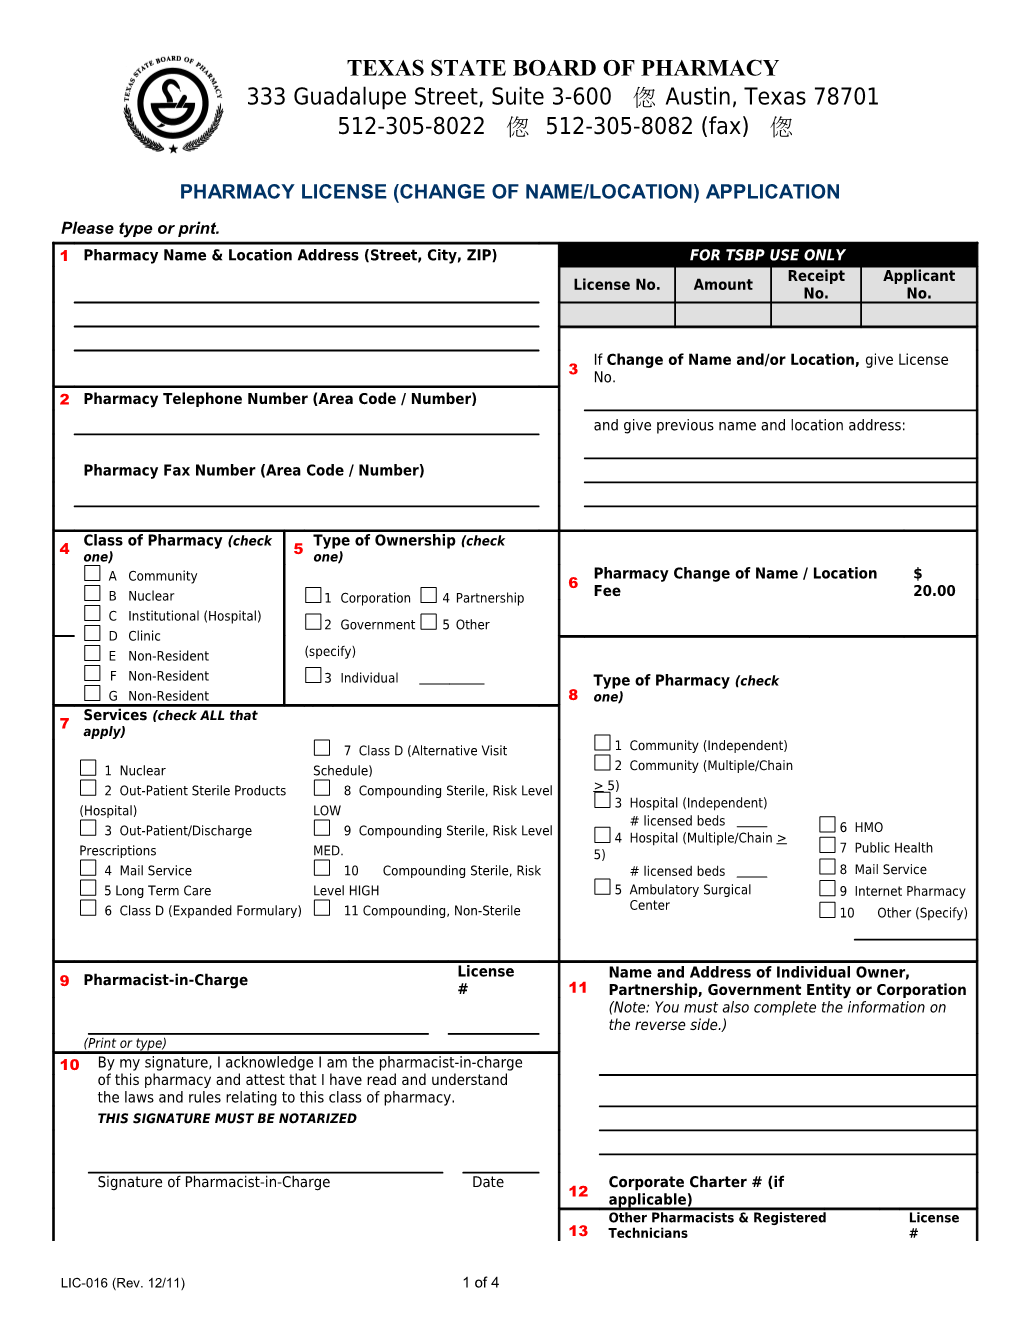 Pharmacy License (Change of Name/Location) Application